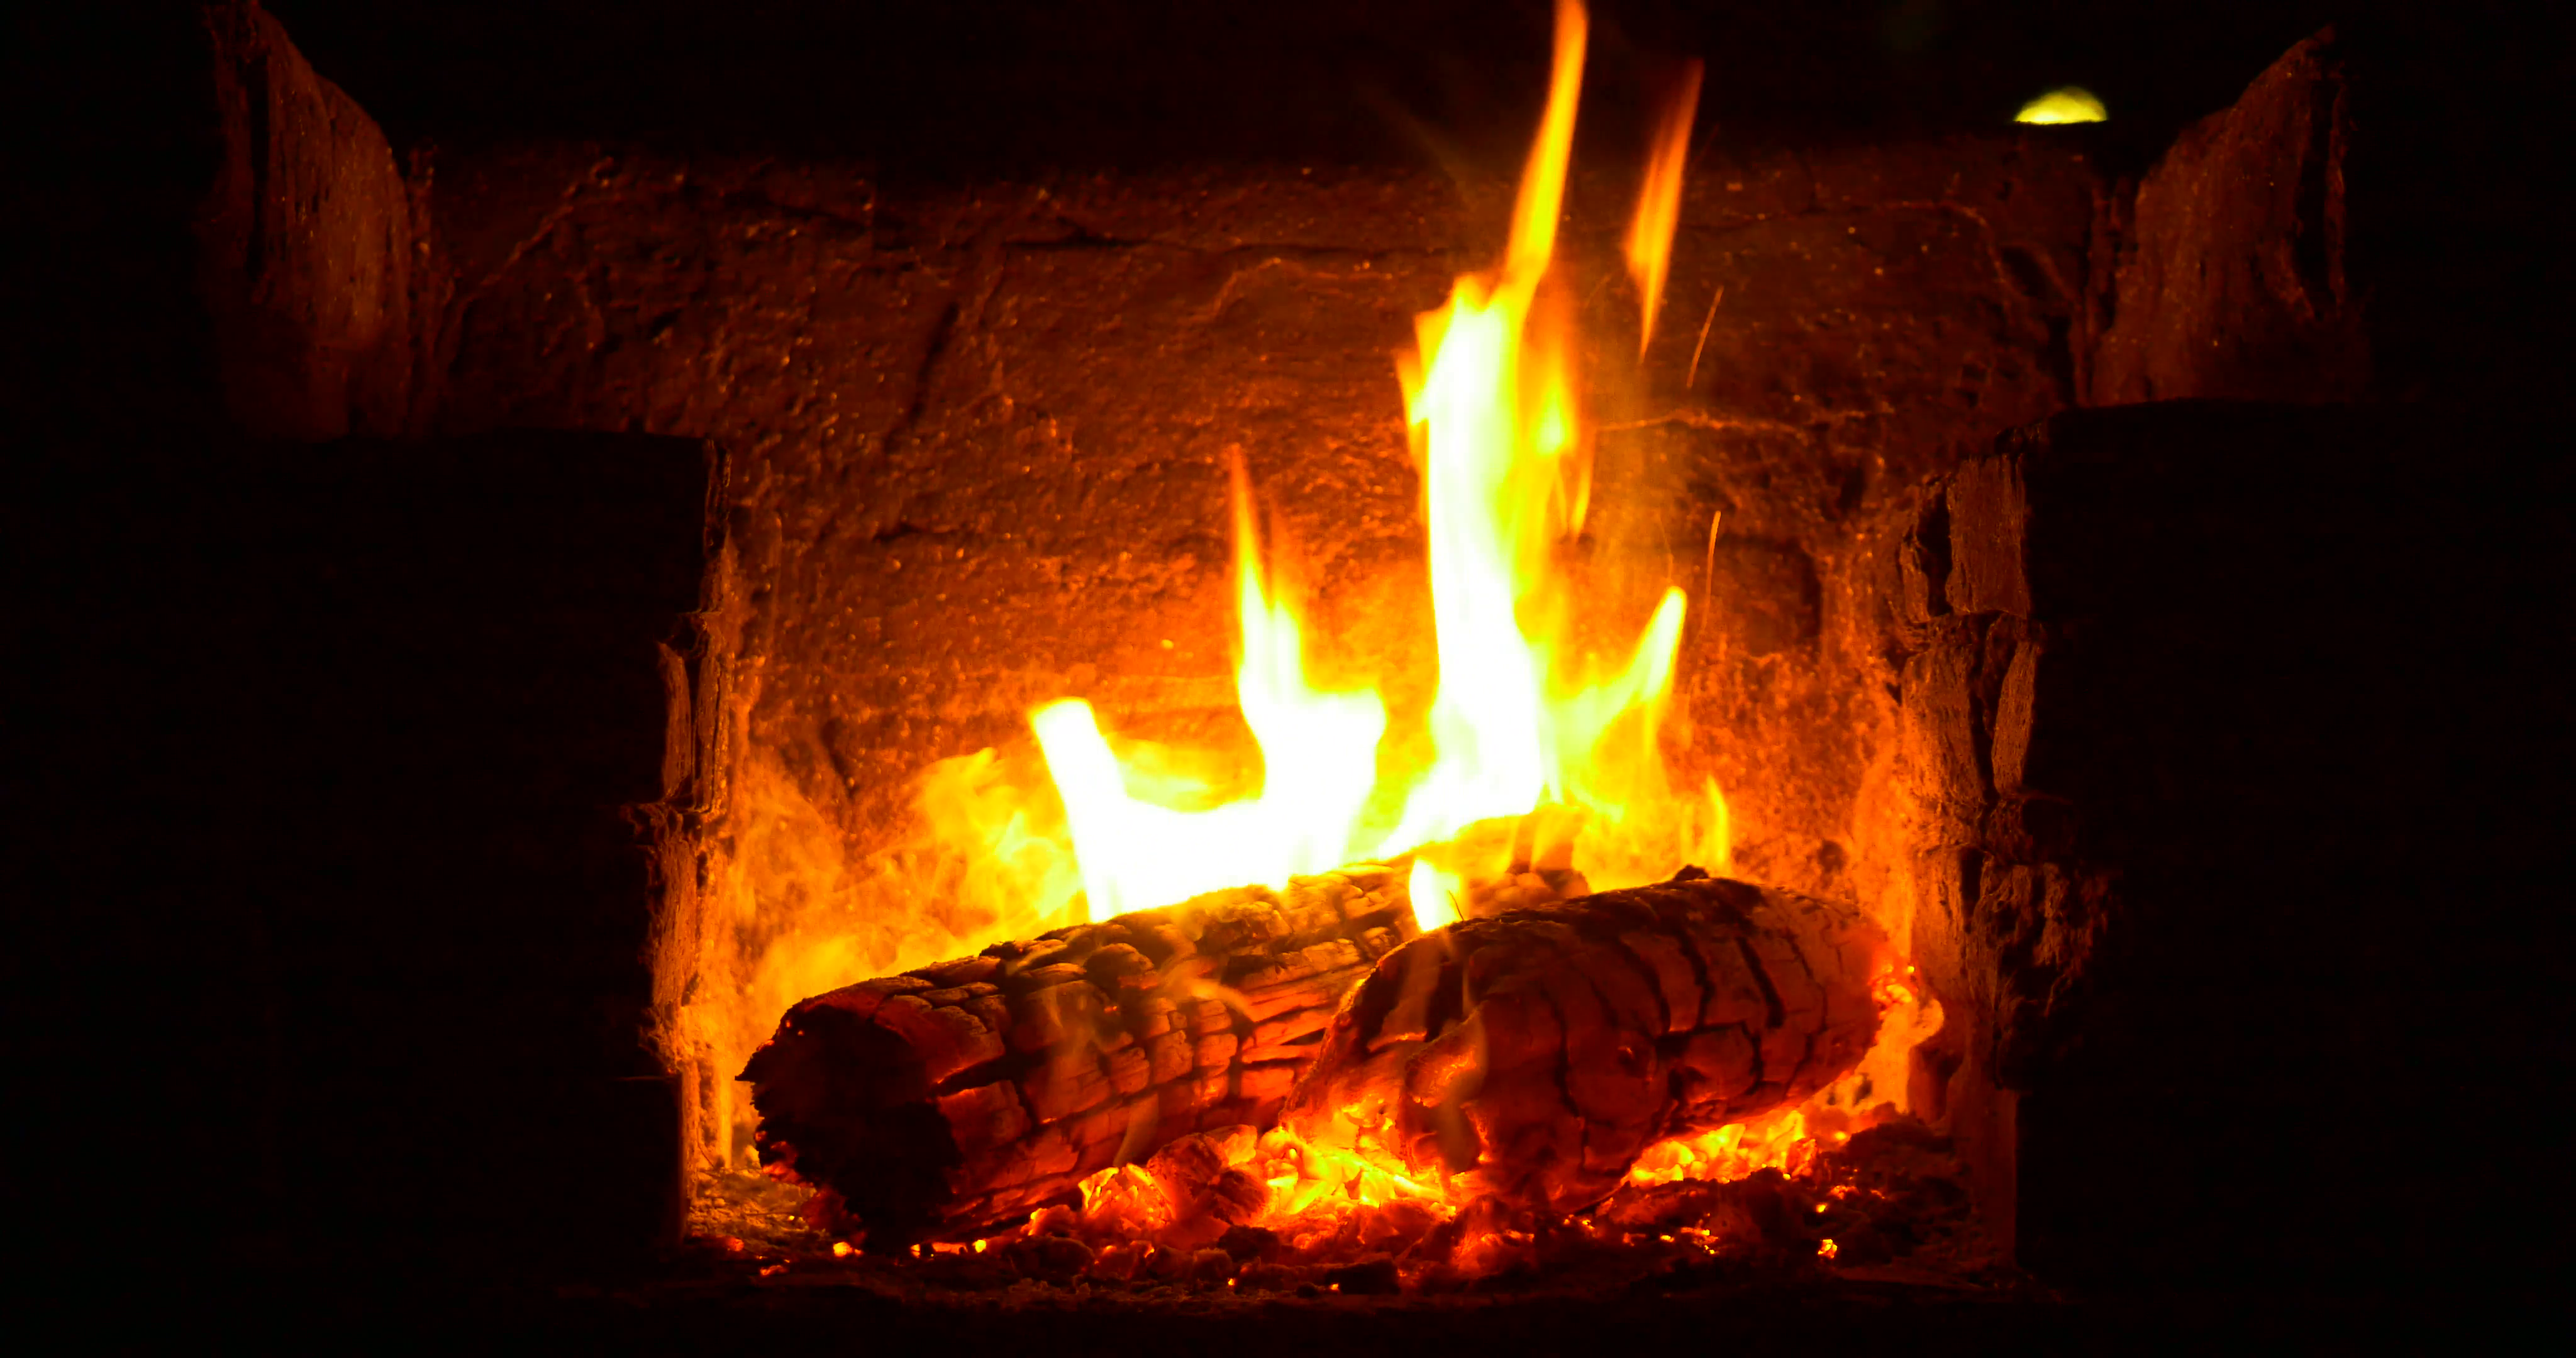 Fireplace with firewood and flame. 4096x2160 Native UHD 30 sec. 24 ...